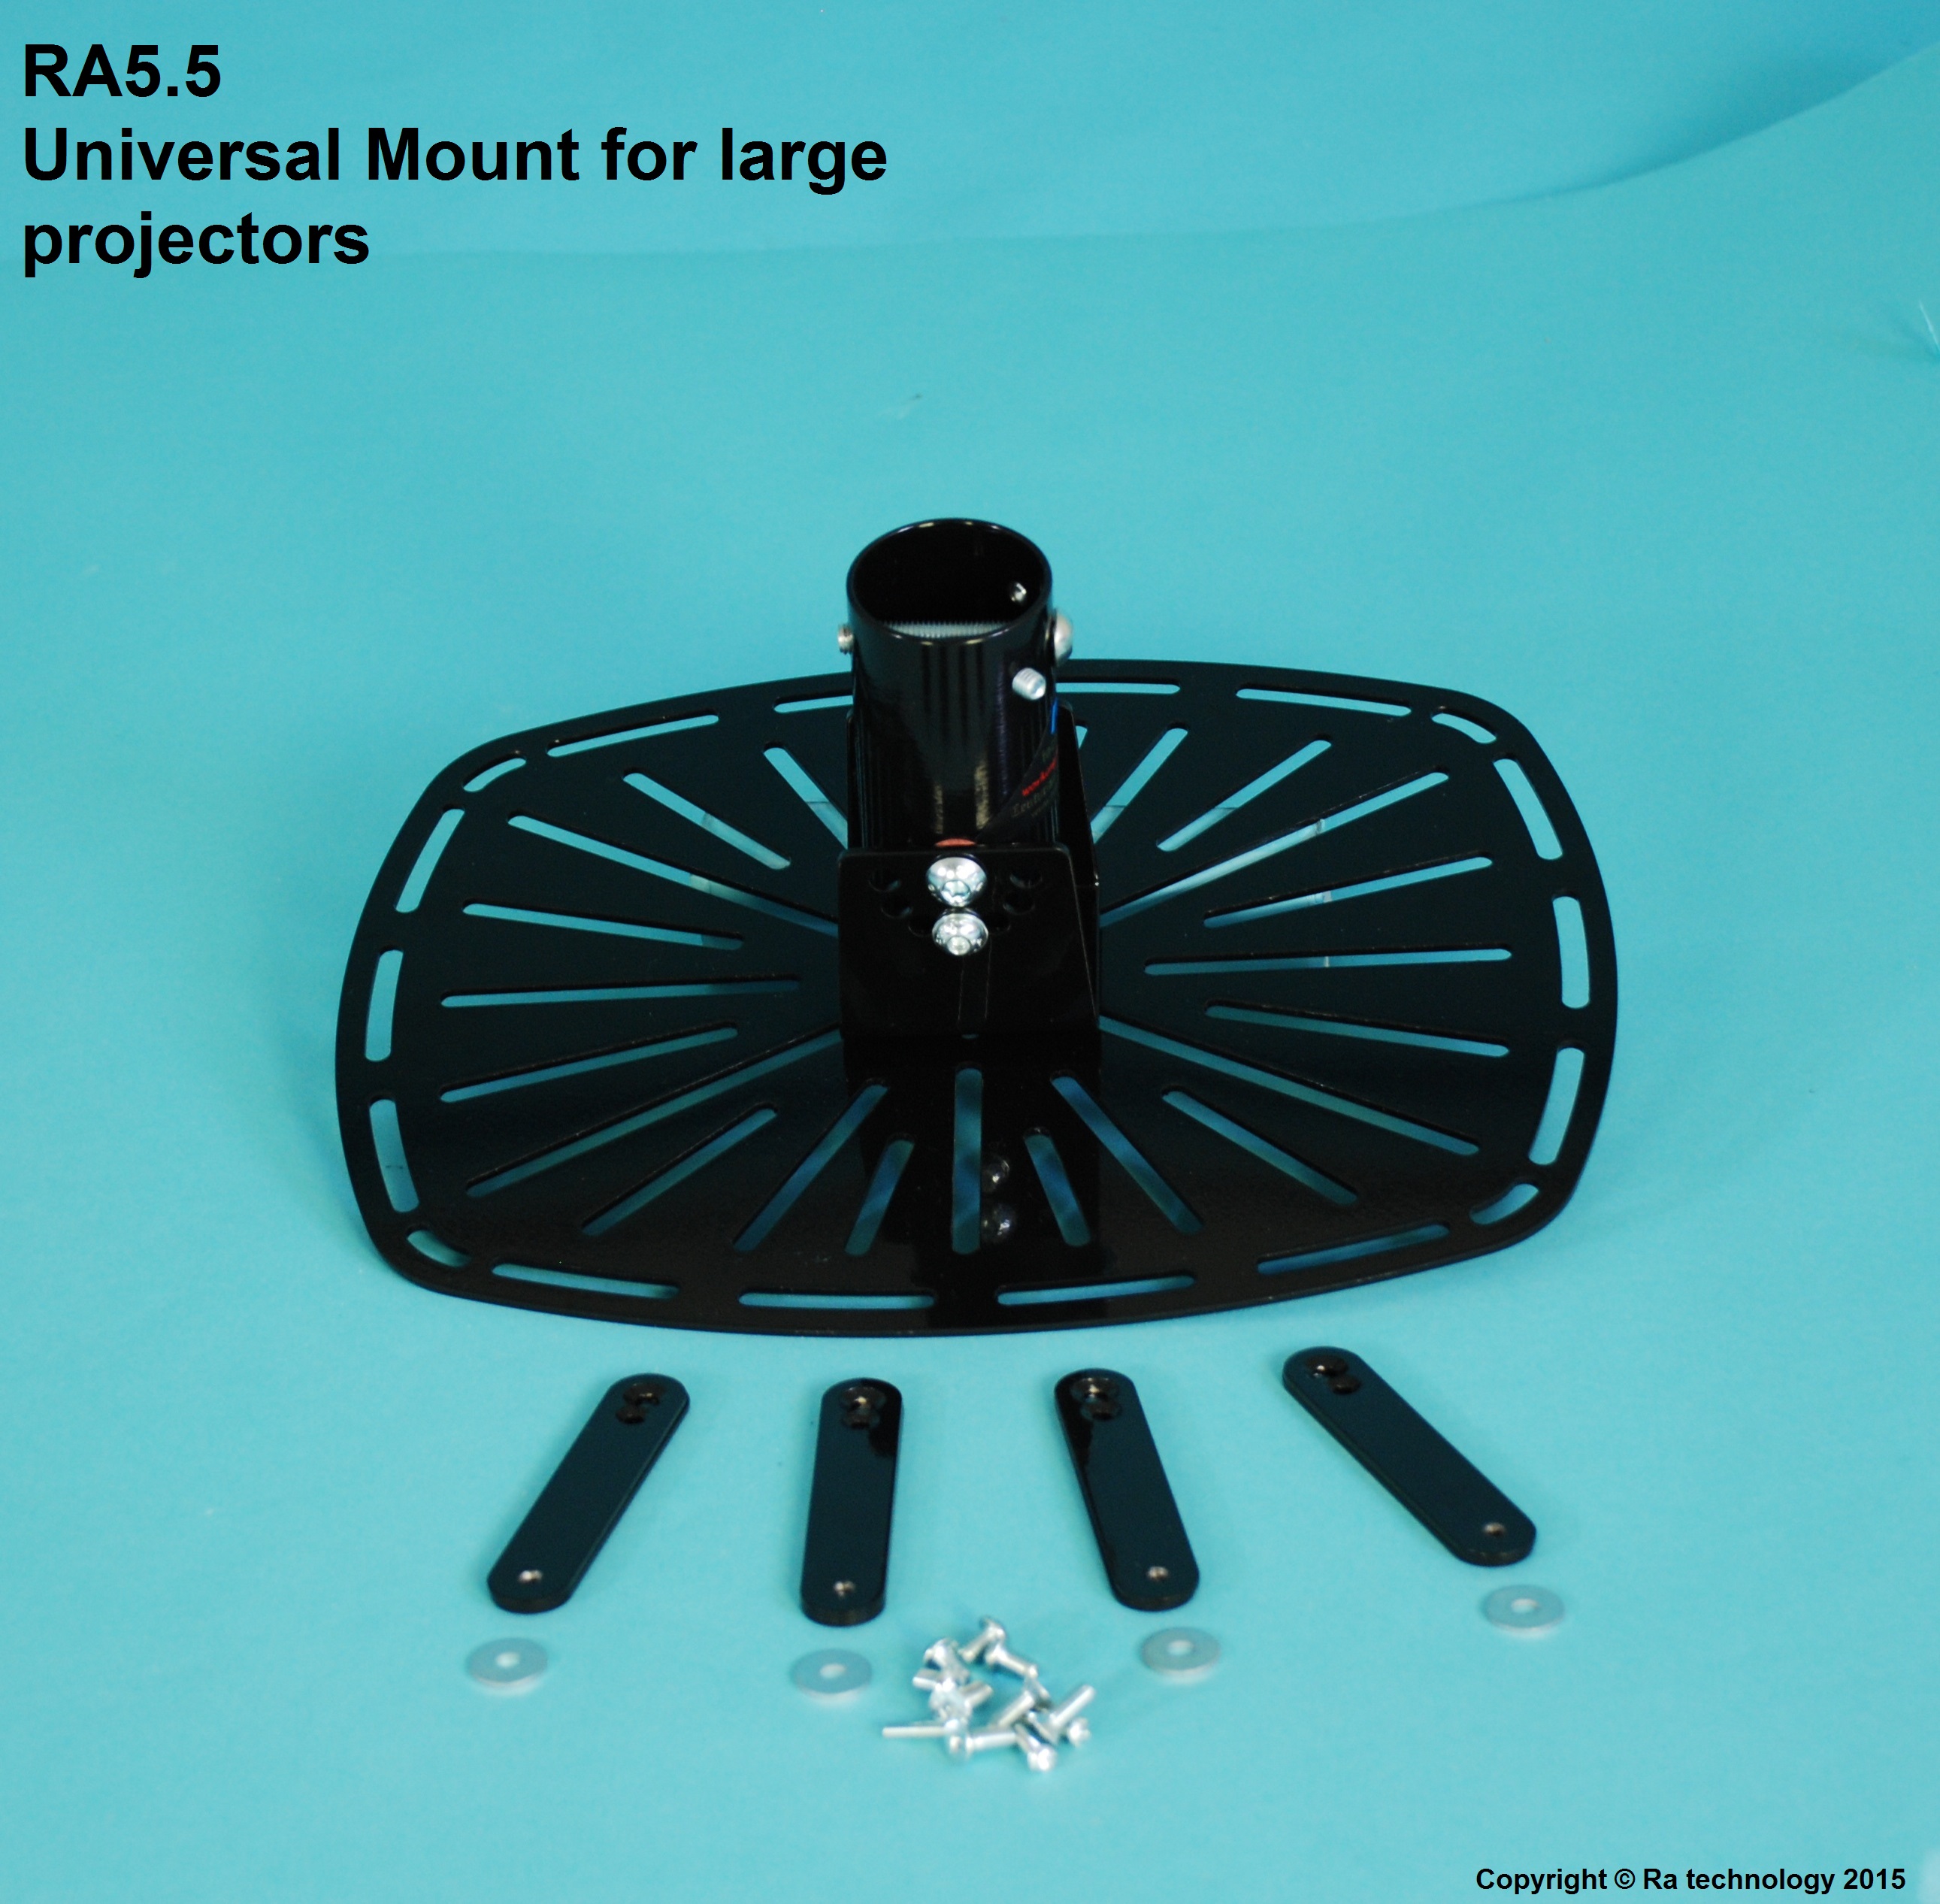 RA5.5 Universal Projector Mount. Large